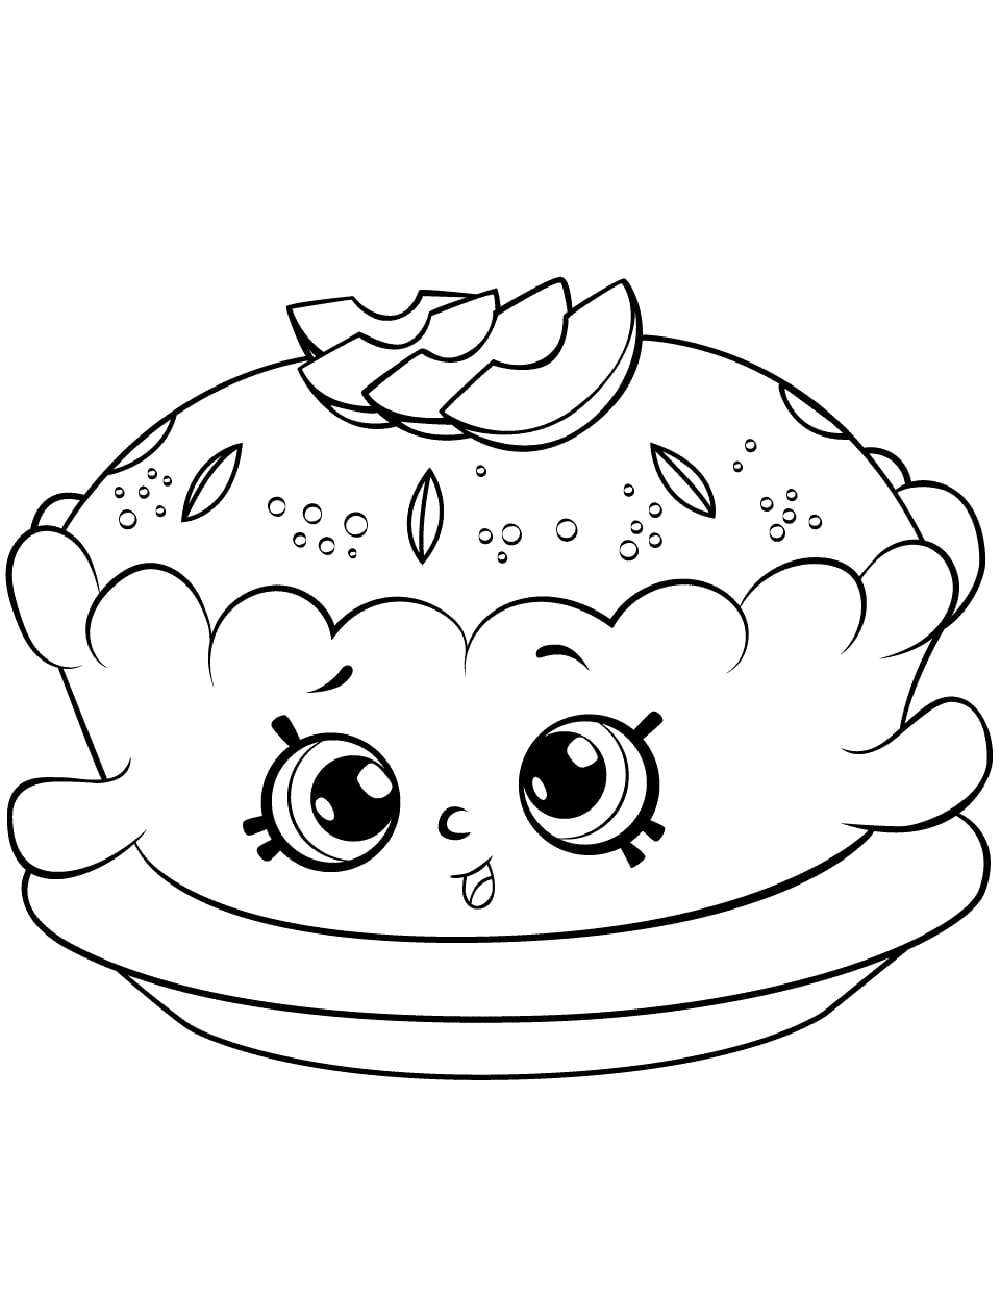 Apple Pie Coloring Pages   Best Coloring Pages For Kids